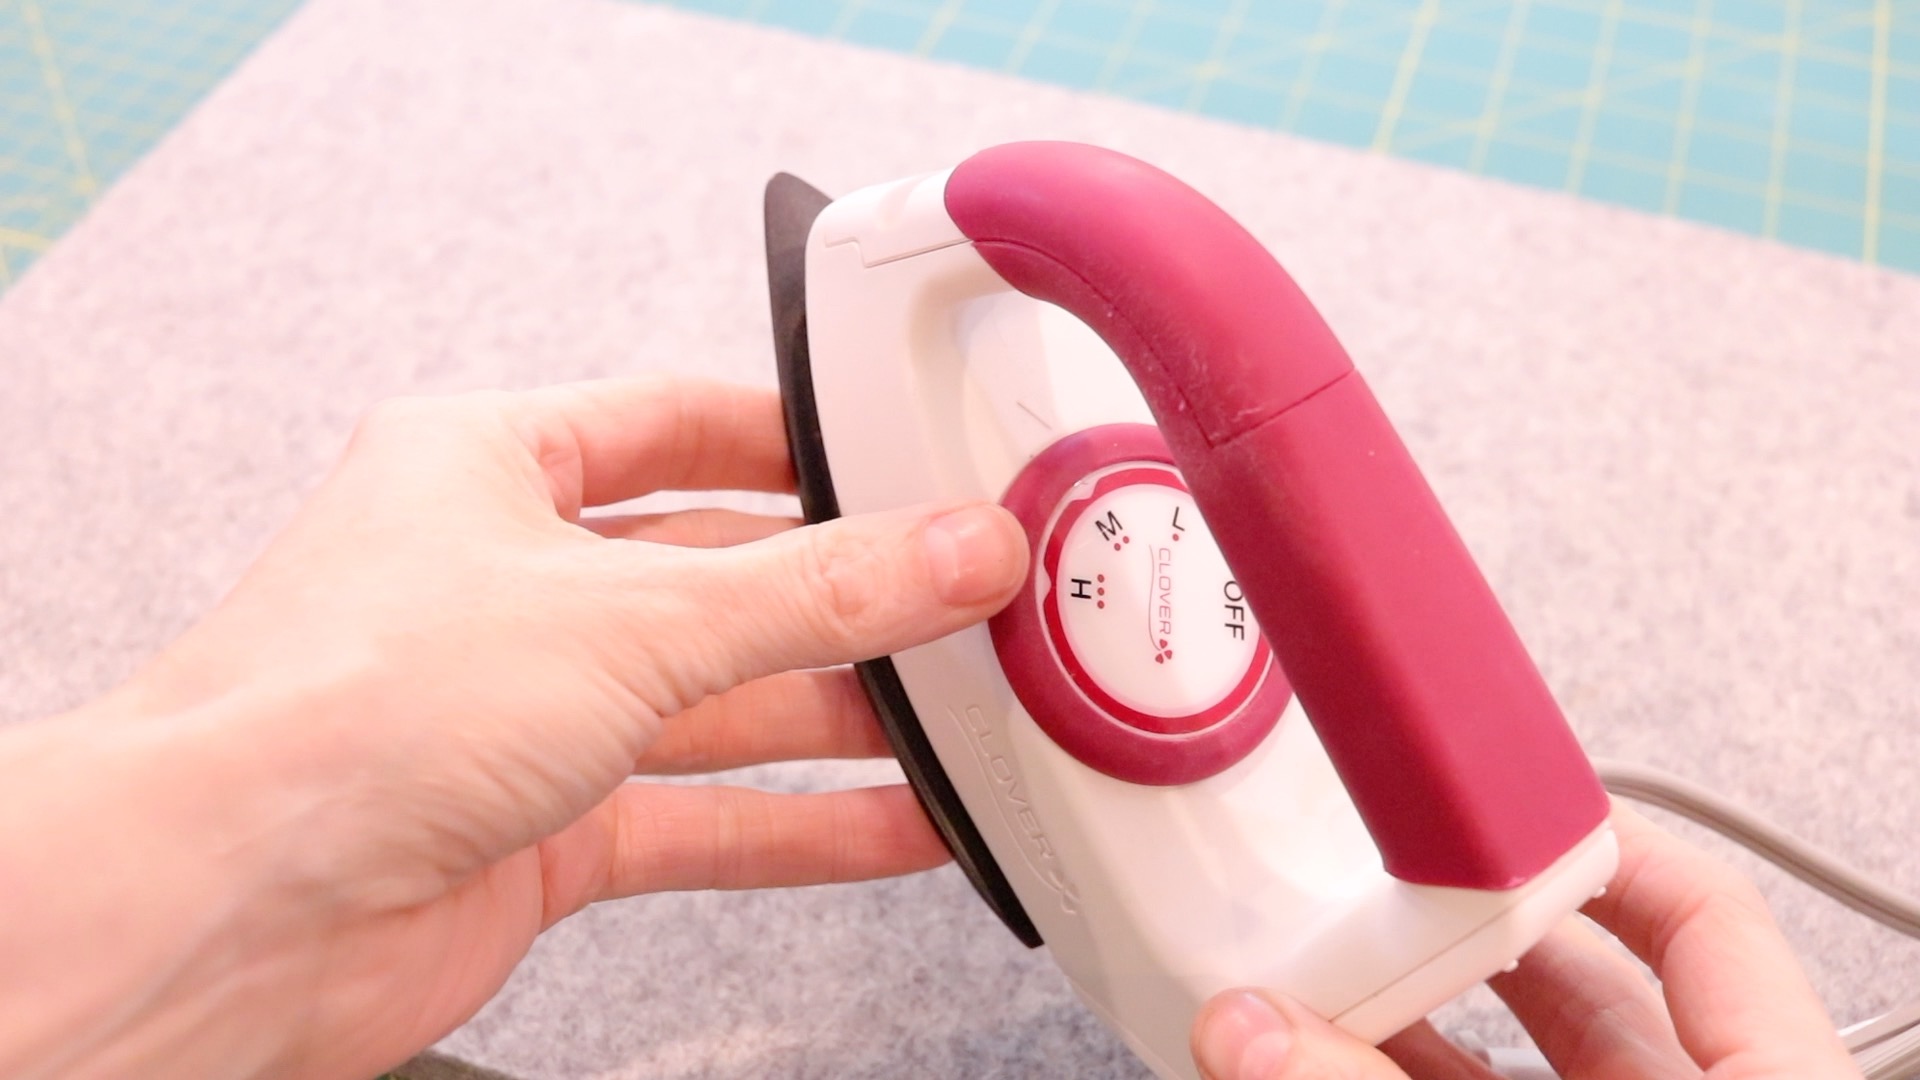 A close up of a mini clover sewing iron and its temperature setting features. The iron is the size of a hand and is fuchsia and white.